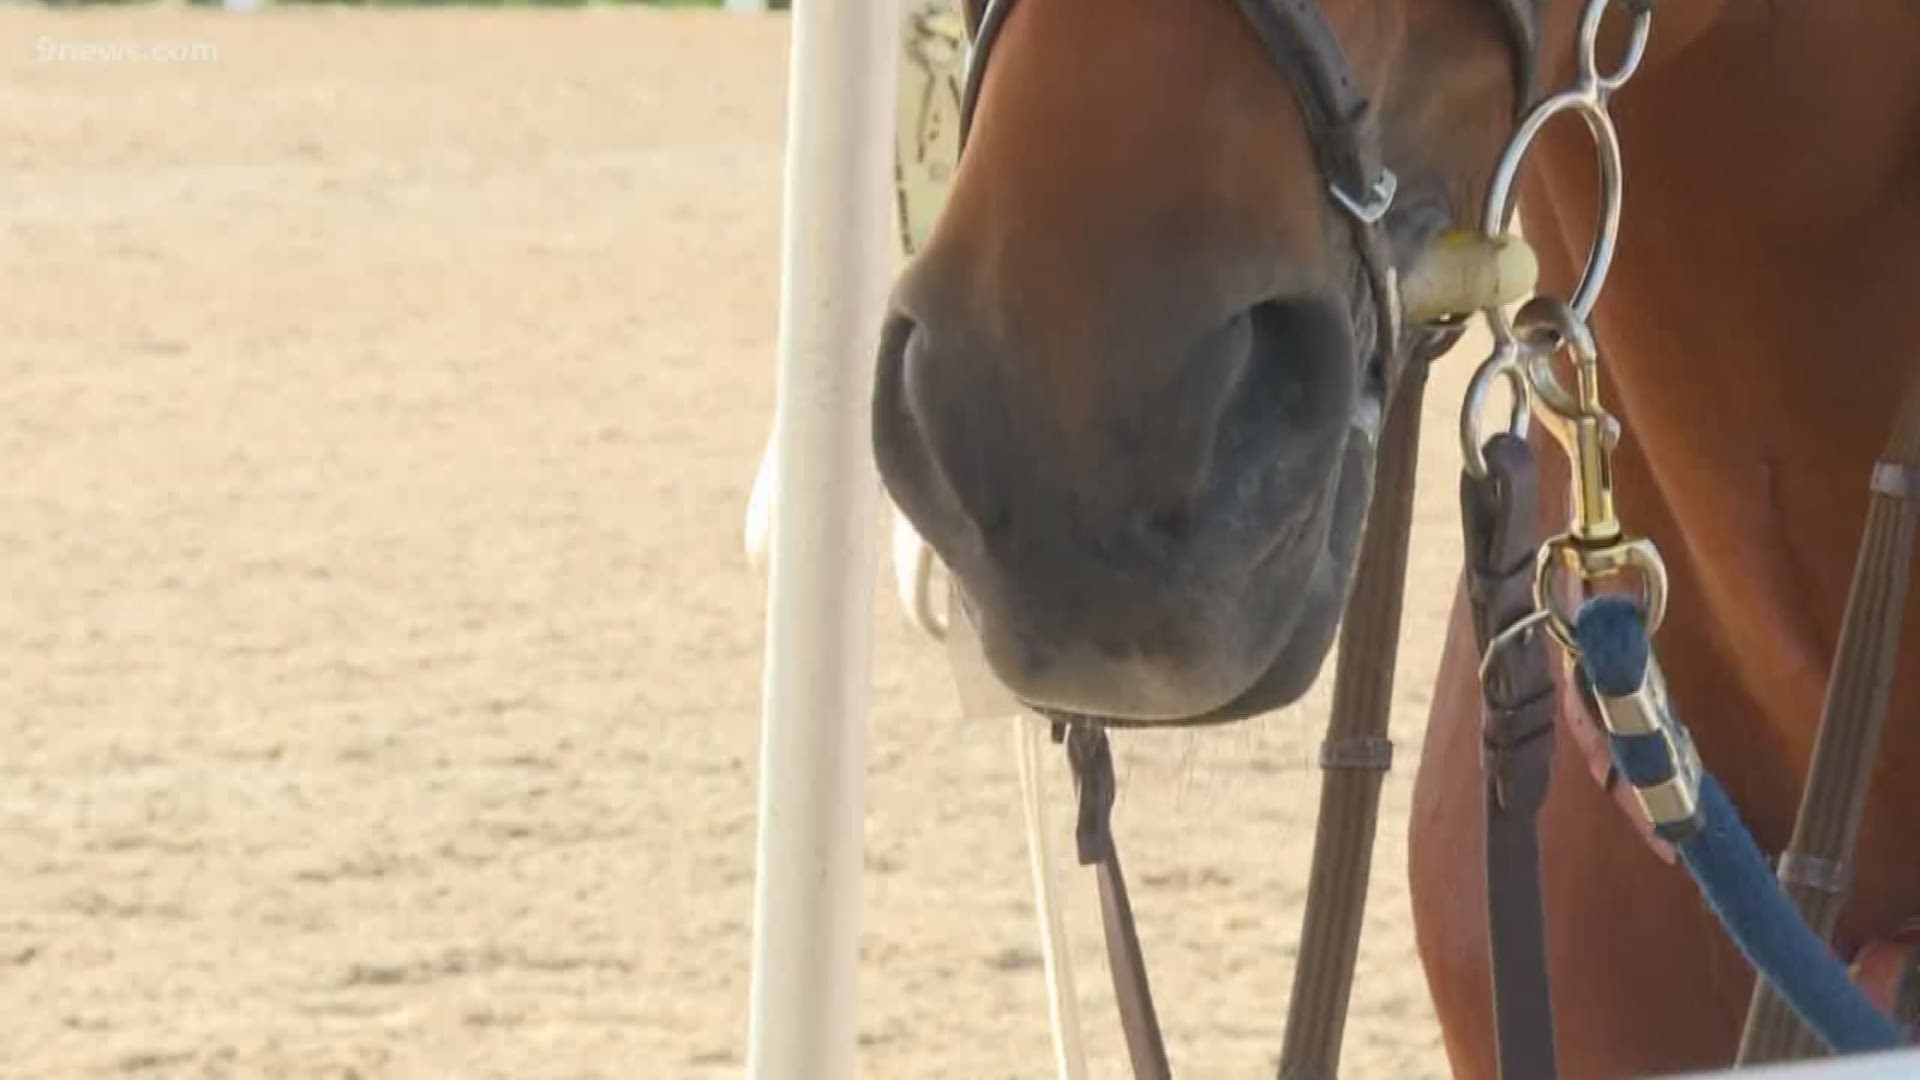 Twenty-six cases of the Vesicular Stomatitis Virus have been reported in three counties. One horse park is taking extra precautions to make sure the animals don't get sick.